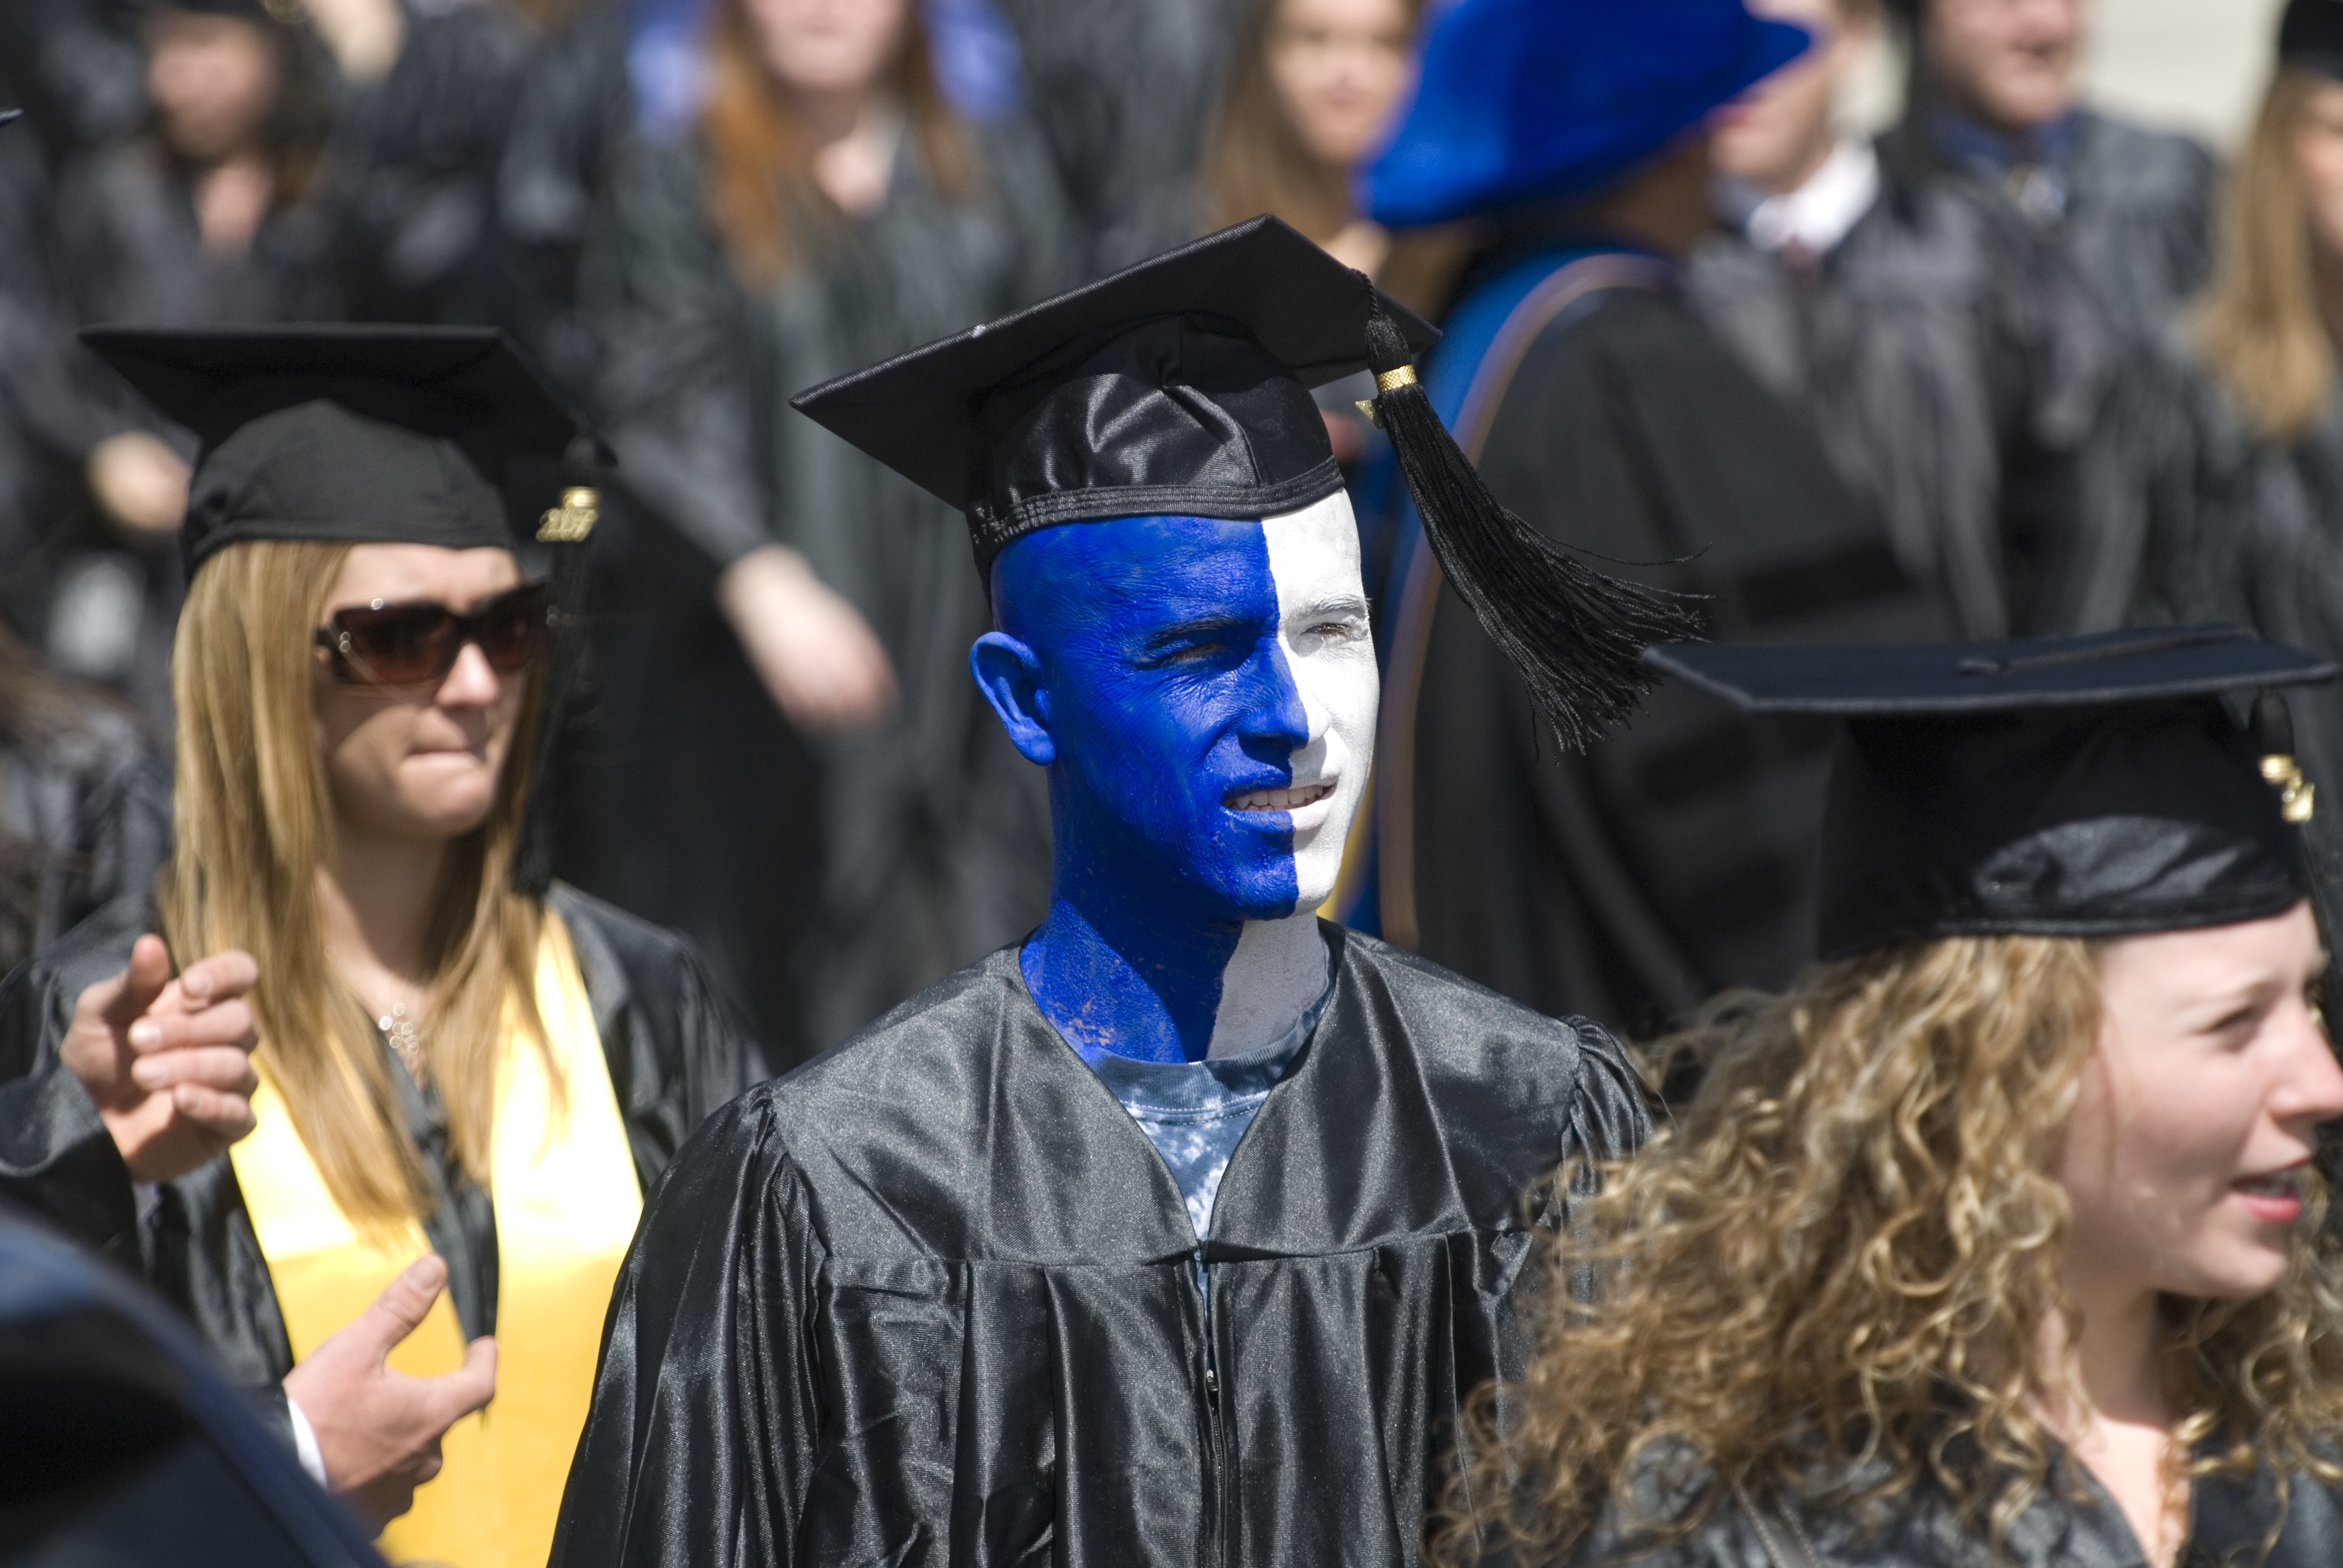 Dale Nosel, wearing blue and white paint, marches with his classmates along Fairfield Way during the the 2007 Commencement procession. (Peter Morenus/UConn File Photo)